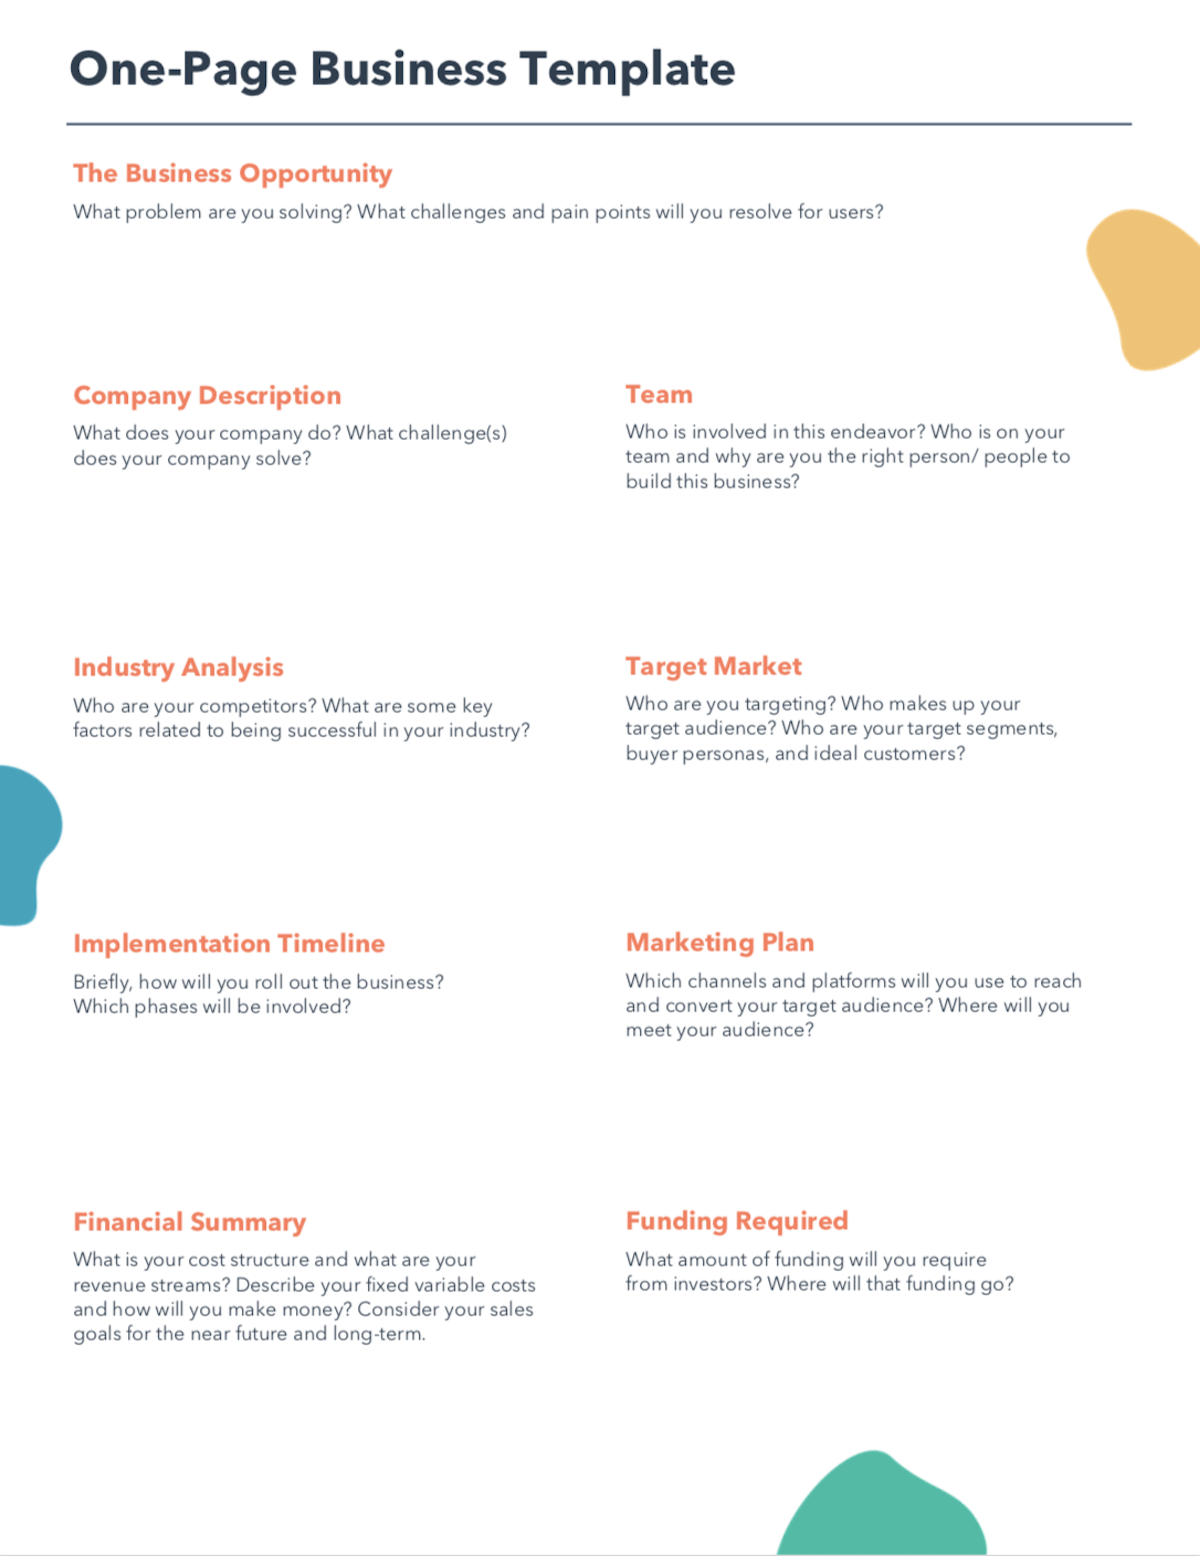 Free One Page Business Plan Template for PDF  Word  HubSpot With Regard To One Page Business Summary Template